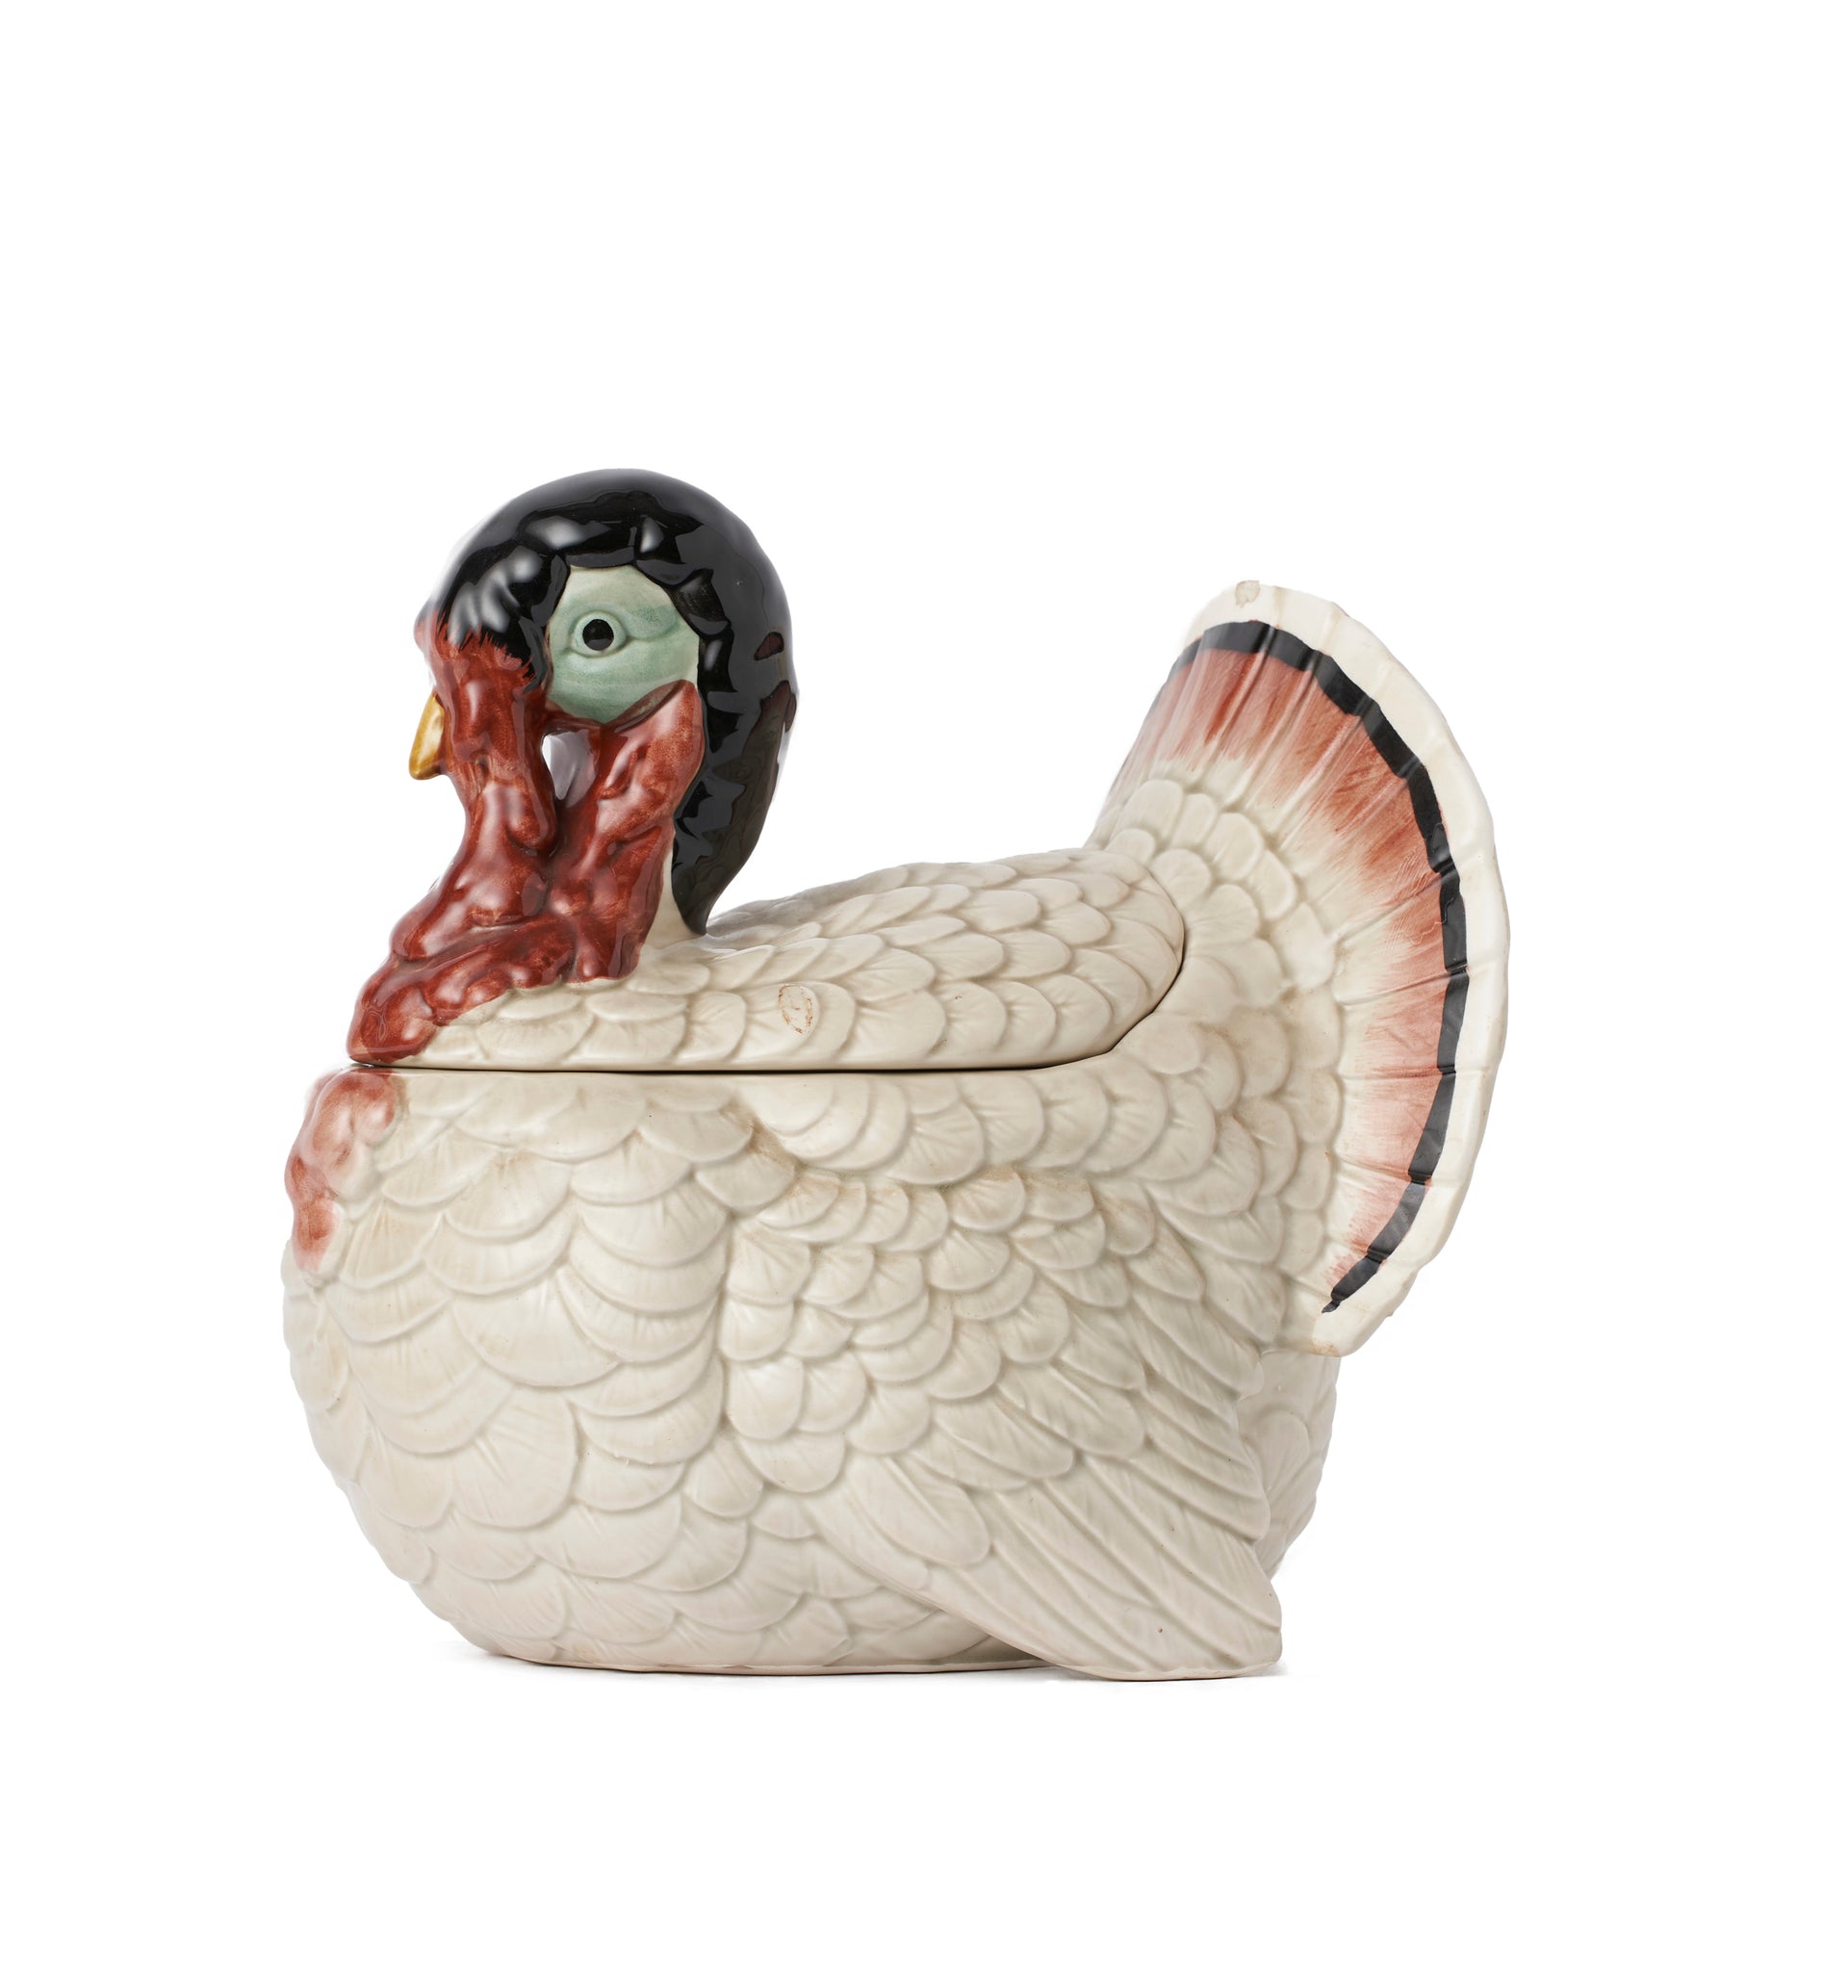 SOLD A vintage Portuguese ceramic turkey form tureen and cover